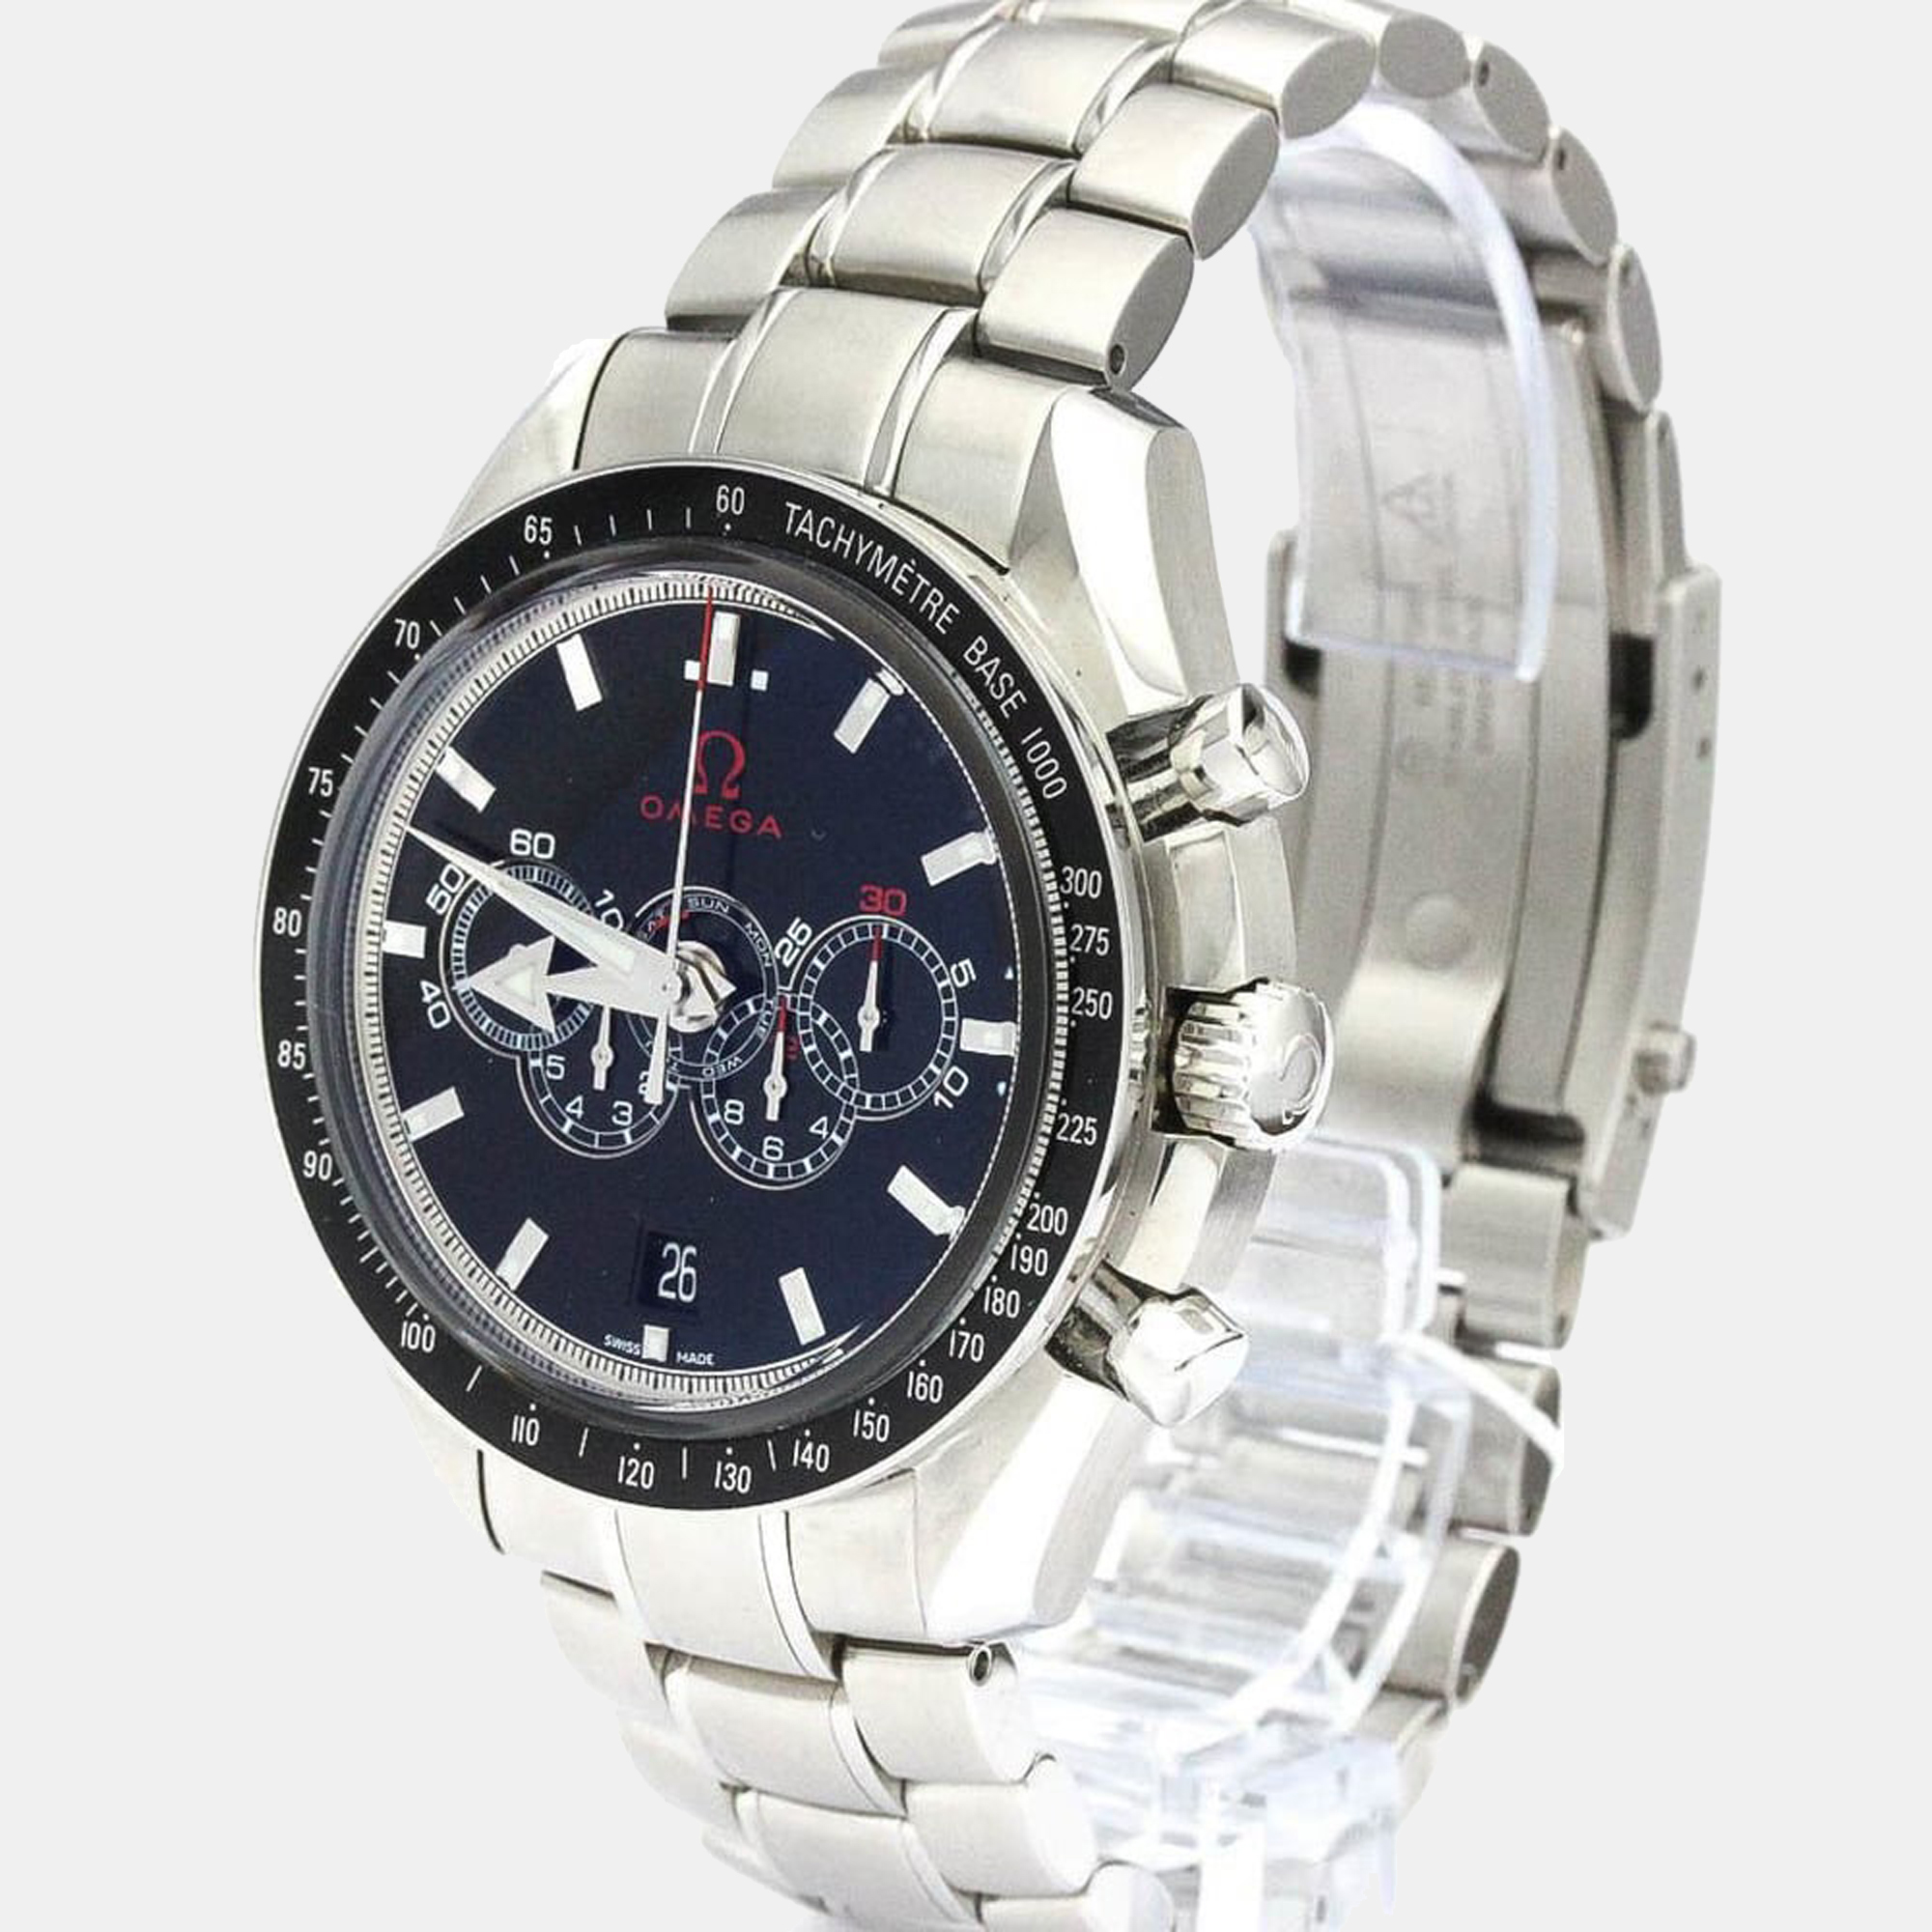 Omega Black Stainless Steel Speedmaster Olympic Limited Edition 321.30.44.52.01.001 Men's Wristwatch 44 Mm